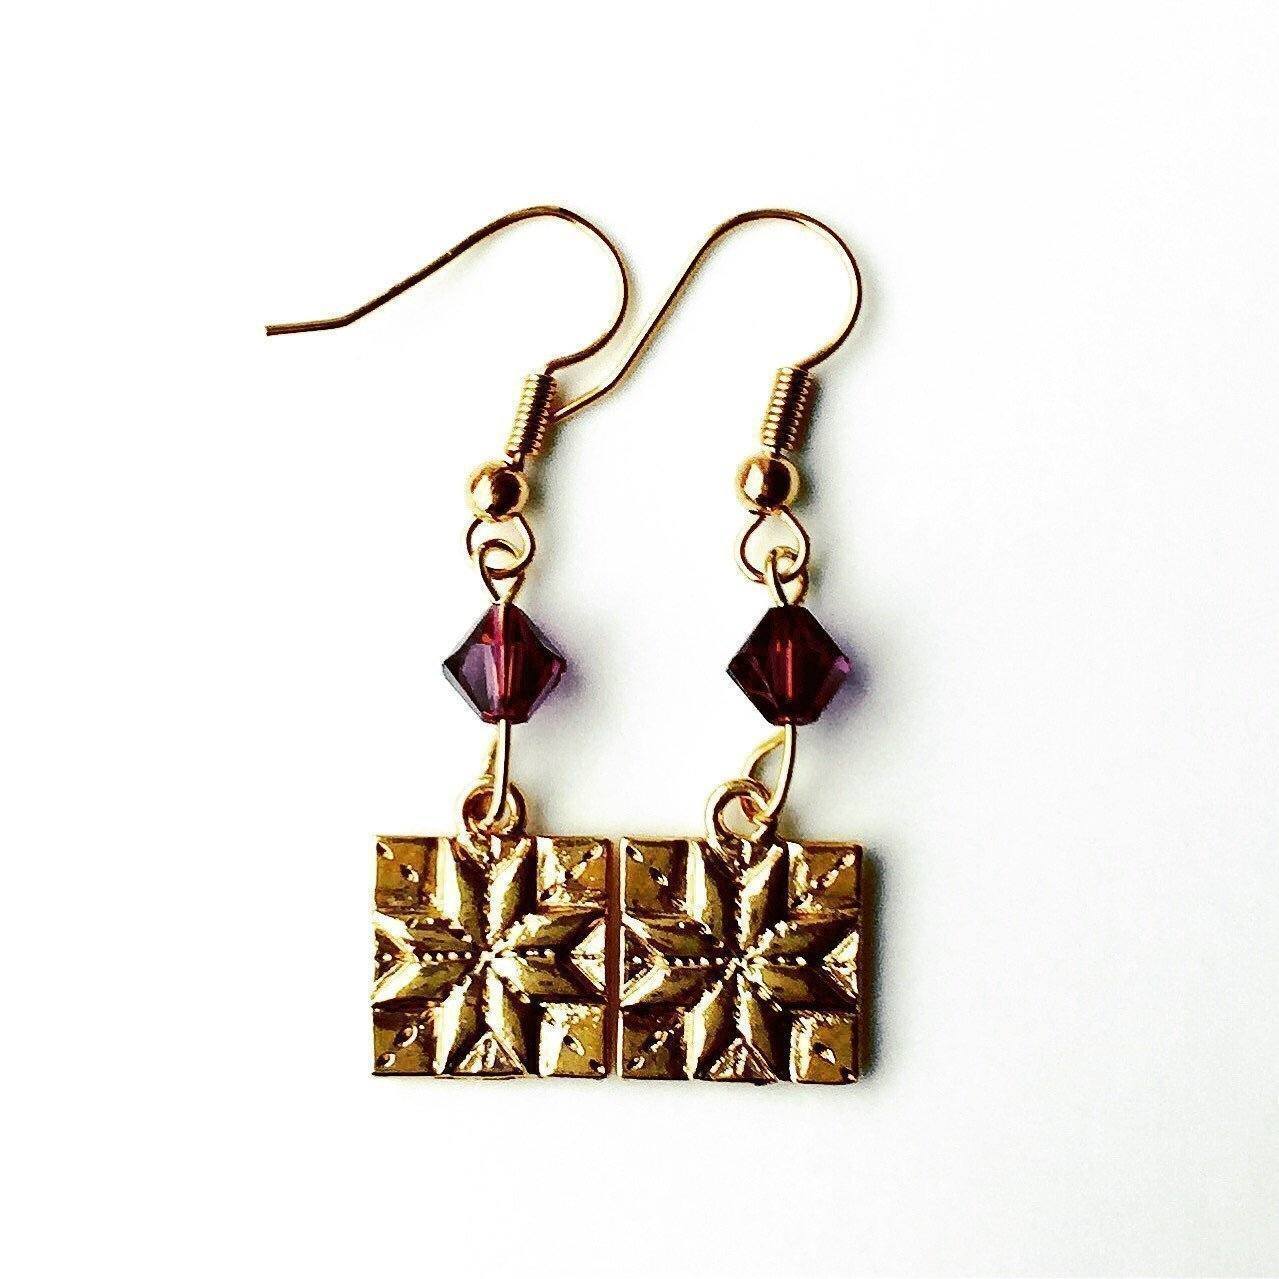 Quilt Patch Gold Earrings with Purple Swarovski Crystals